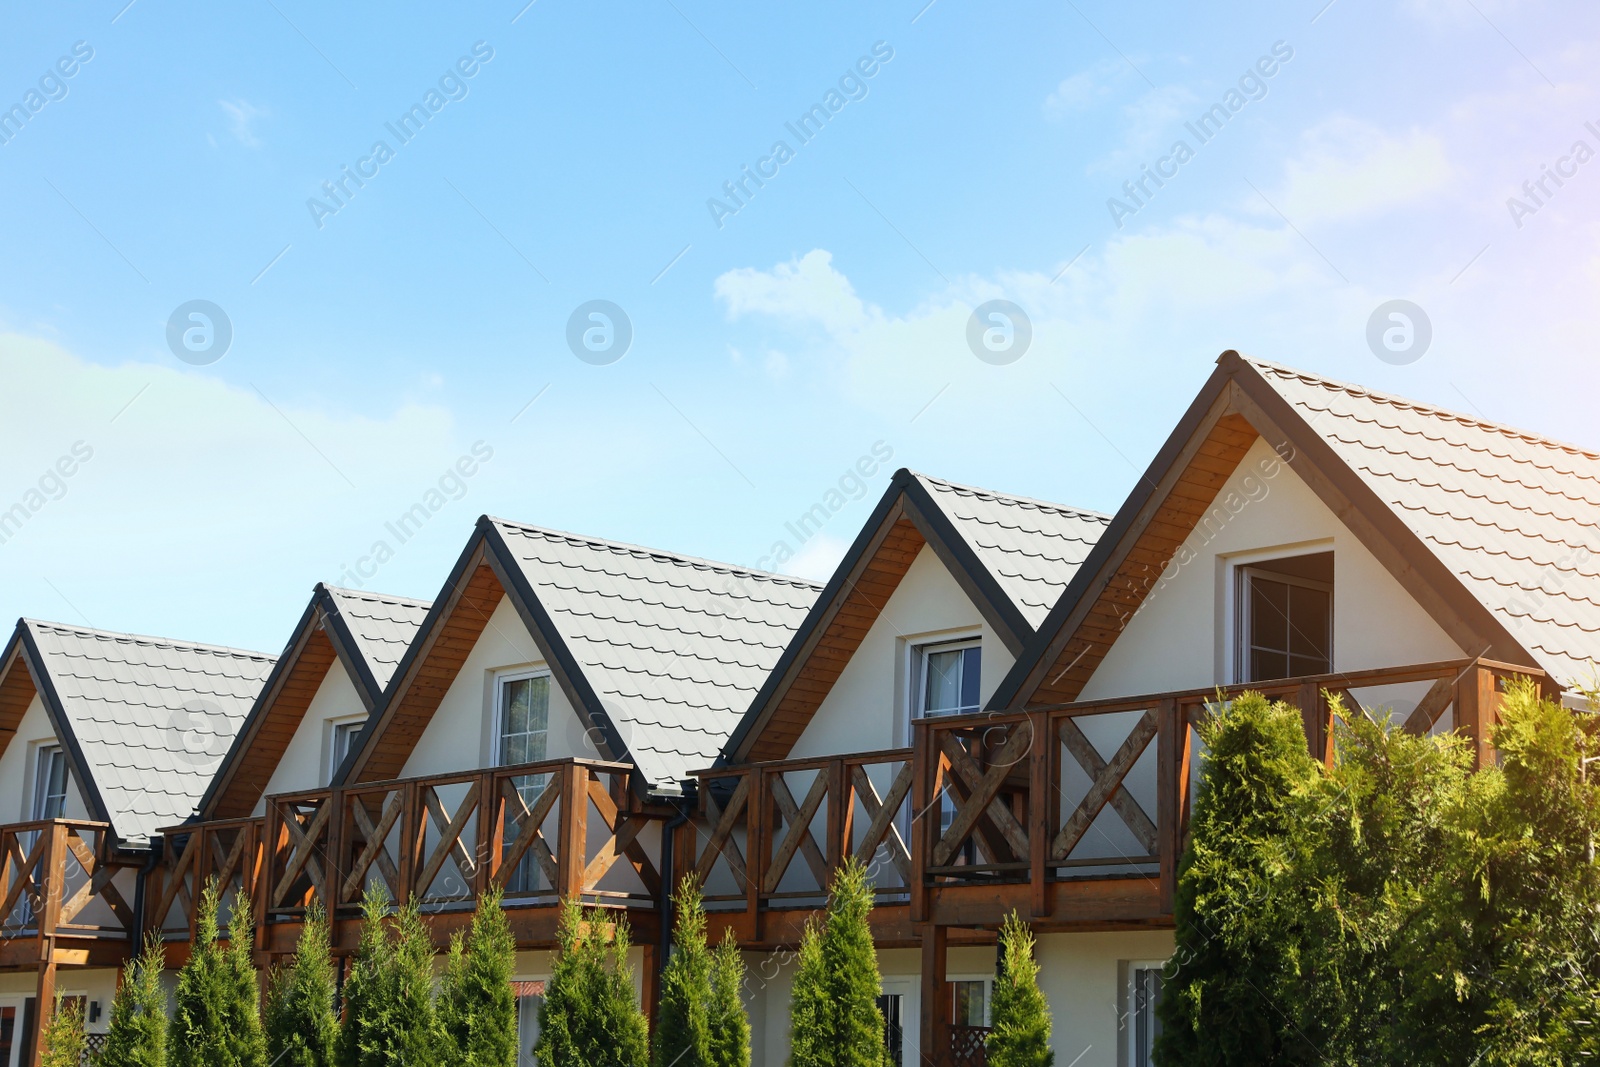 Photo of Exterior of beautiful houses with balconies against blue sky